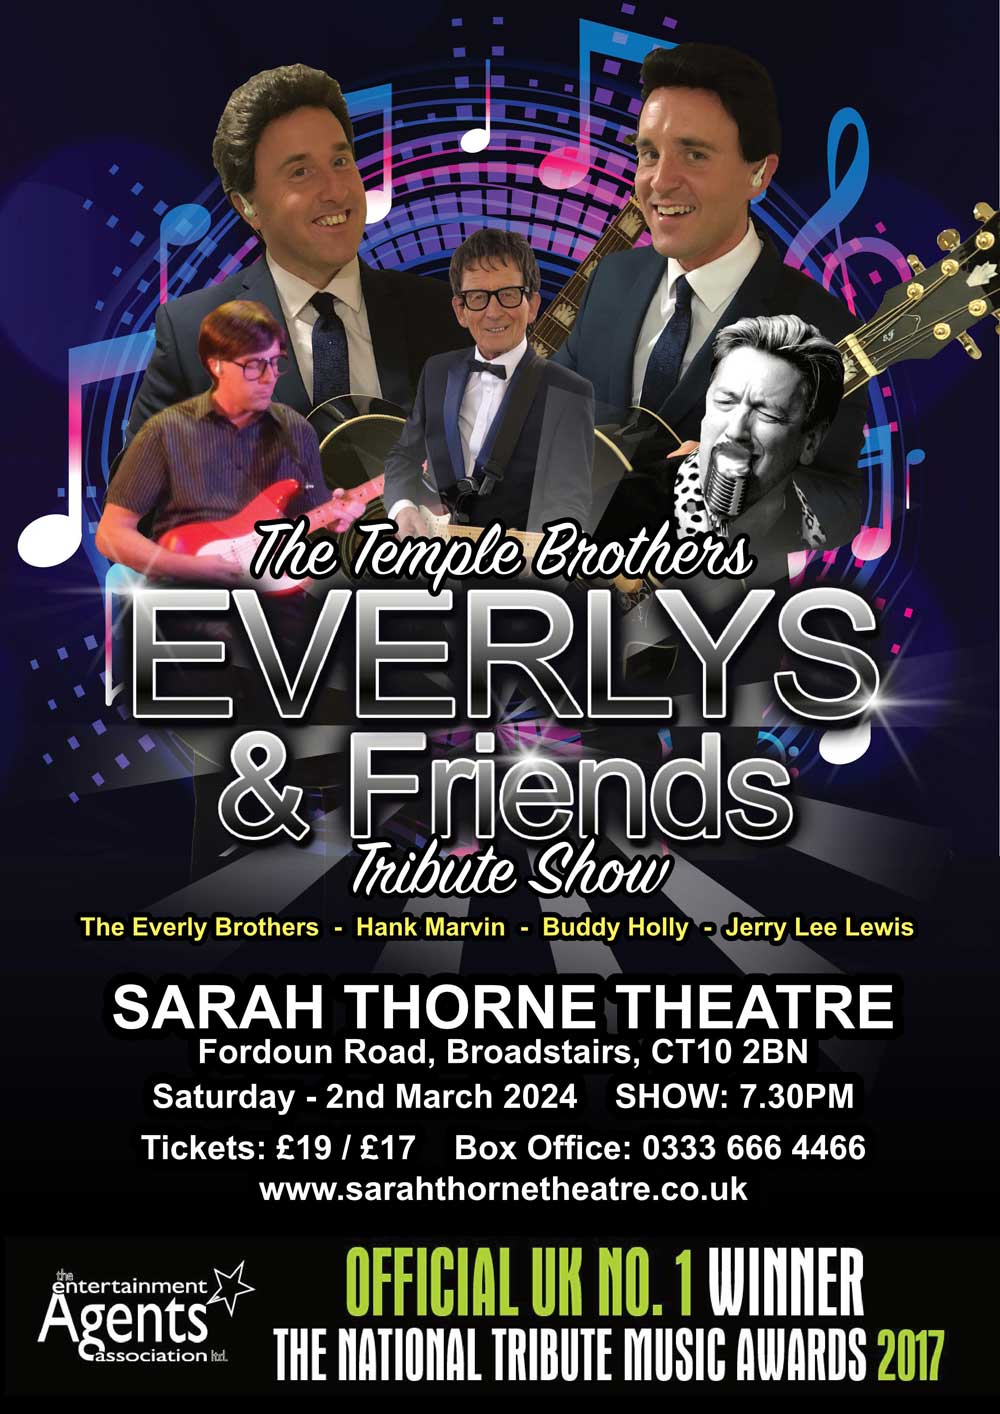 Image of Sarah Thorne Theatre event - Everlys and Friends